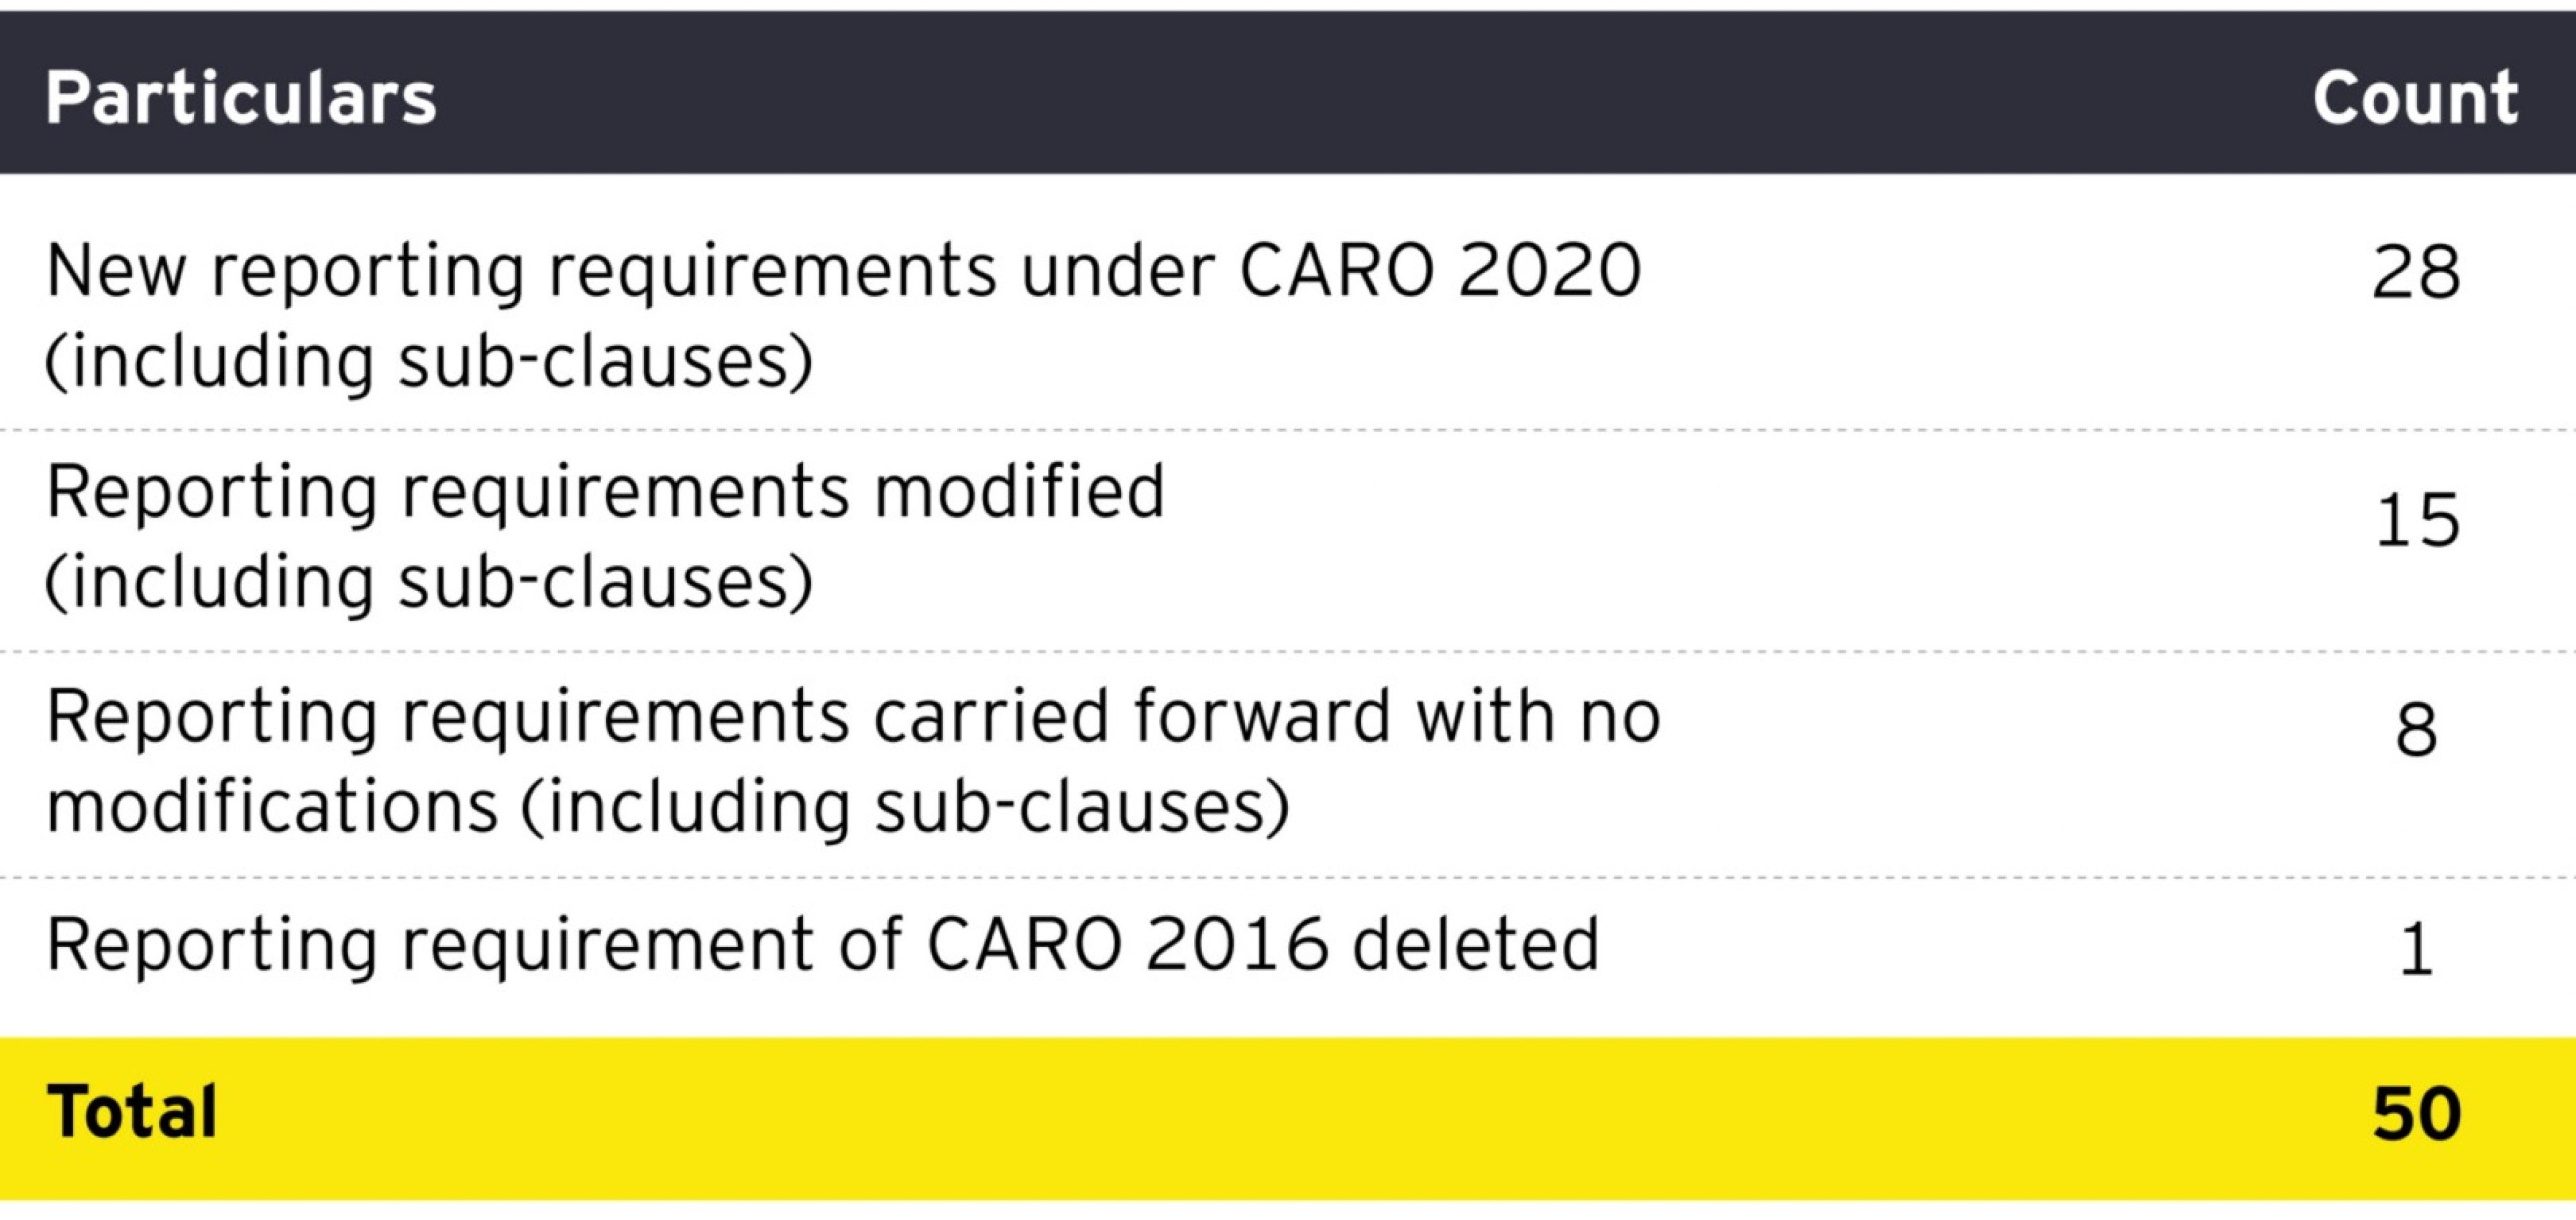 Overview of CARO 2020